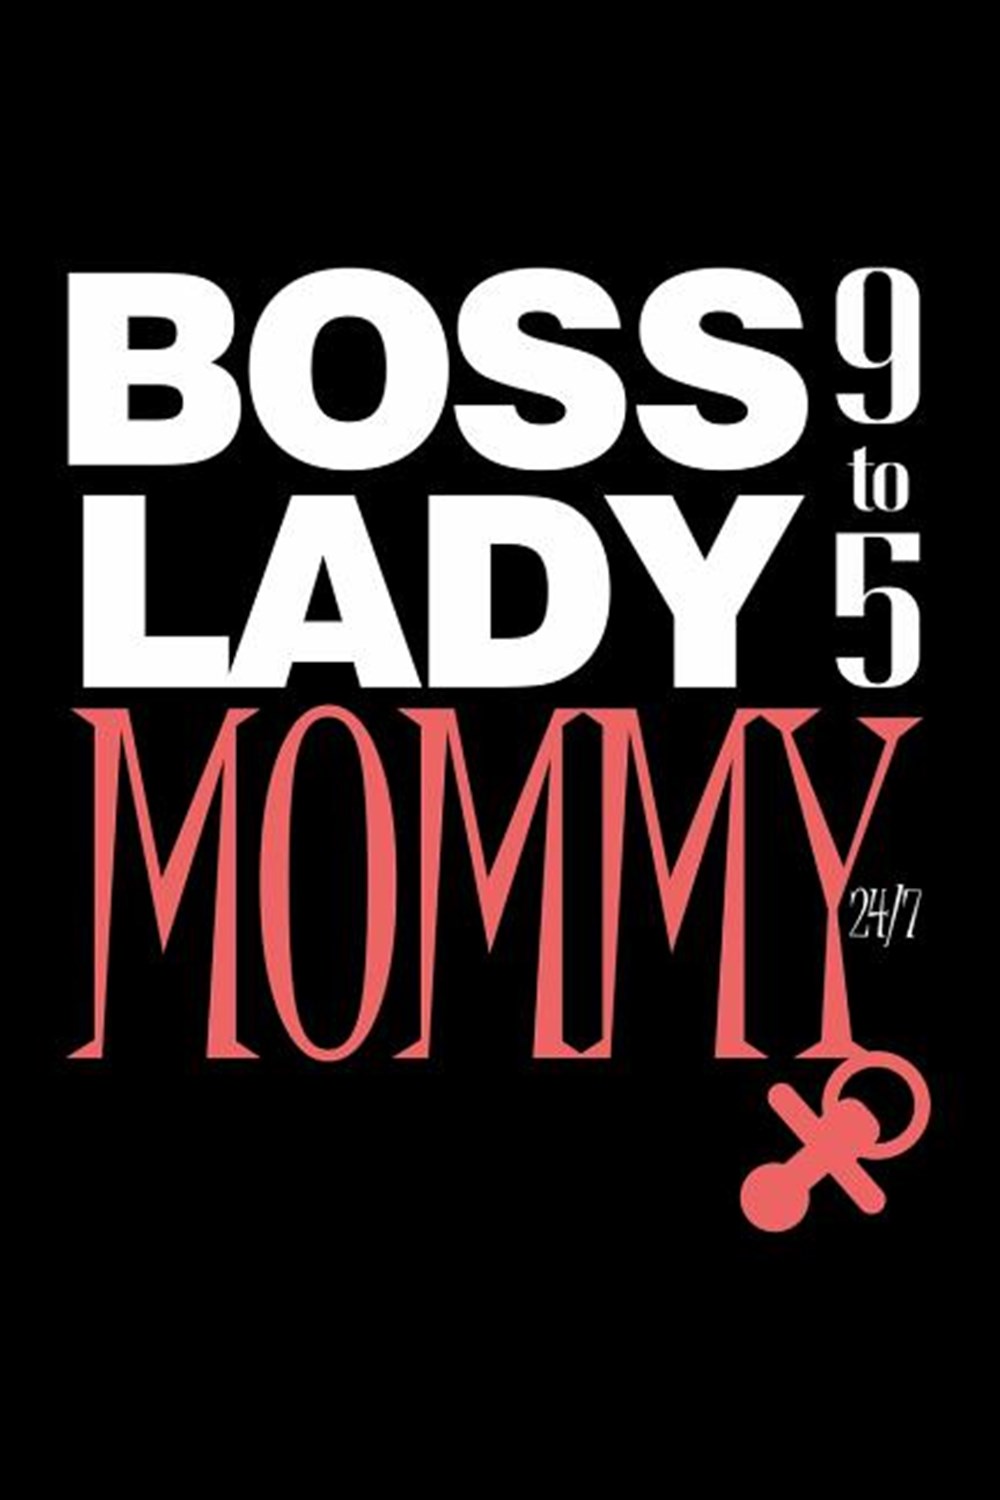 Boss Lady Mommy 9 To 5 24/7 Blank Paper Sketch Book - Artist Sketch Pad Journal for Sketching, Doodl